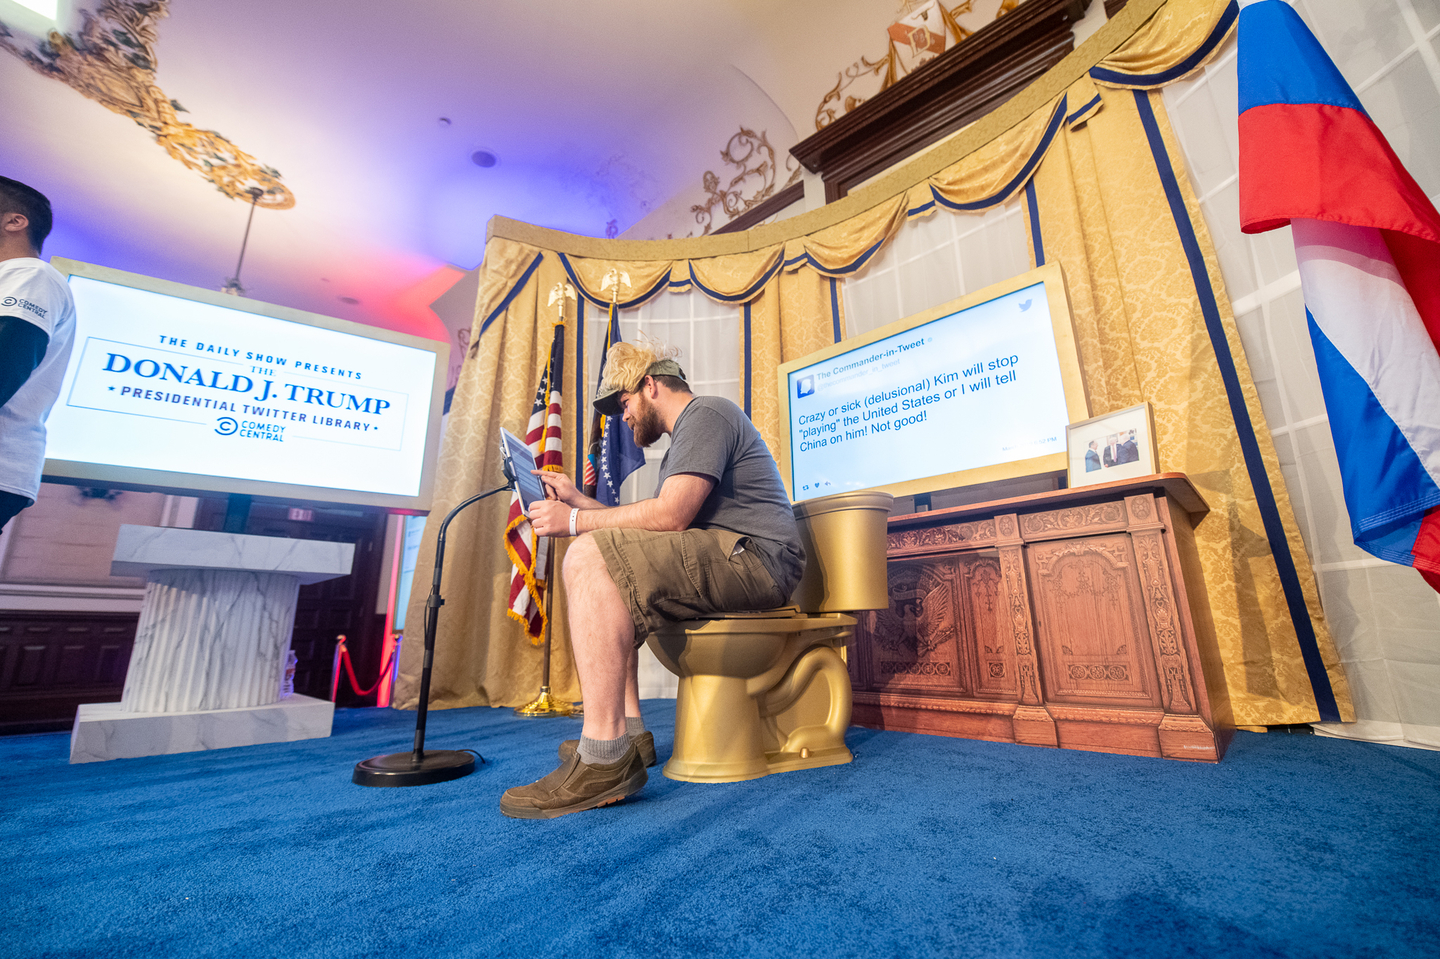 Presented by The Daily Show with Trevor Noah, stop by The Driskill Hotel to explore The Donald J. Trump Presidential Twitter Library.